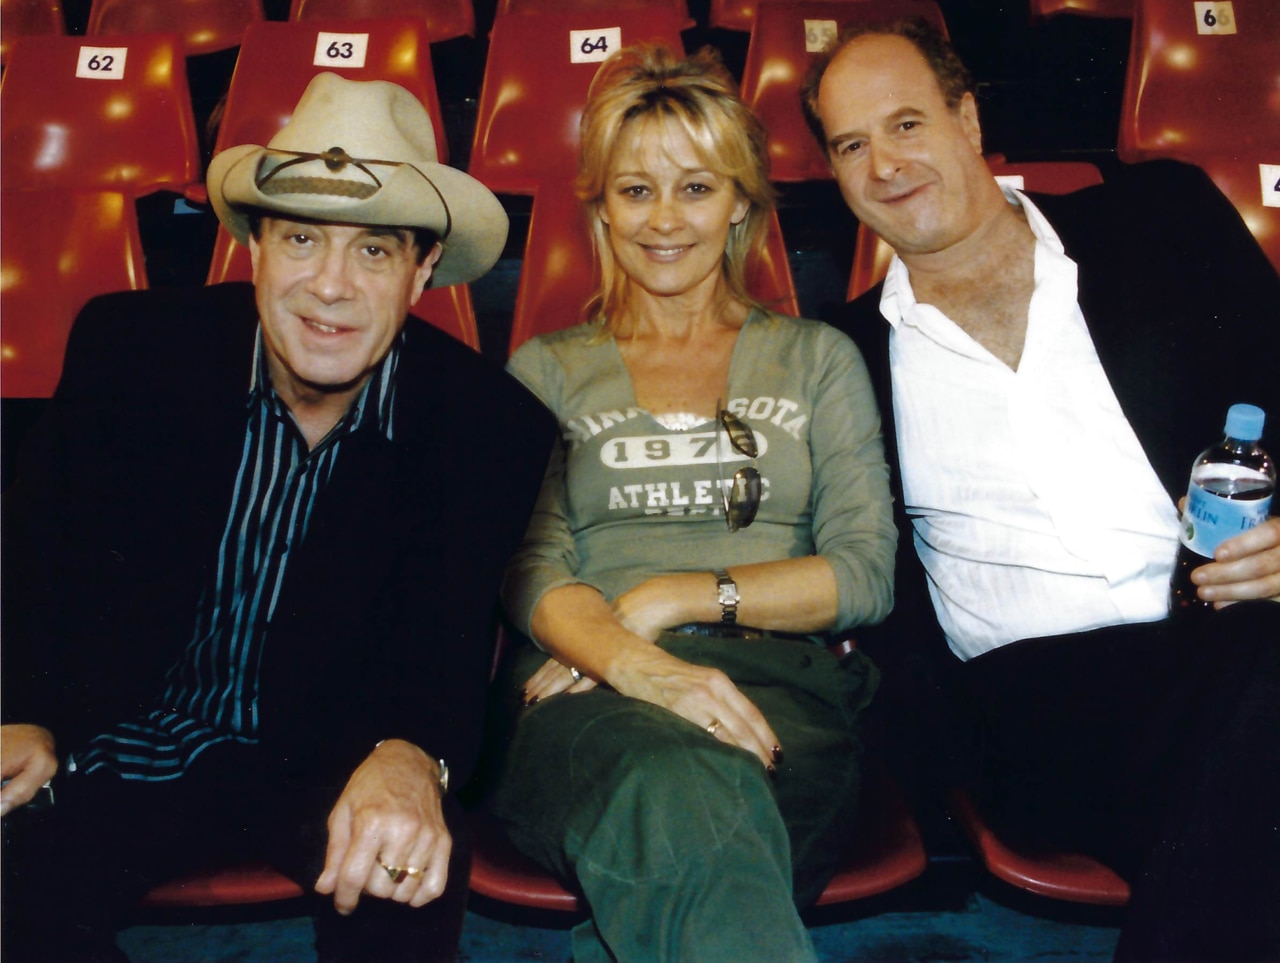 Molly Meldrum (left) with Sue and Michael Gudinski.